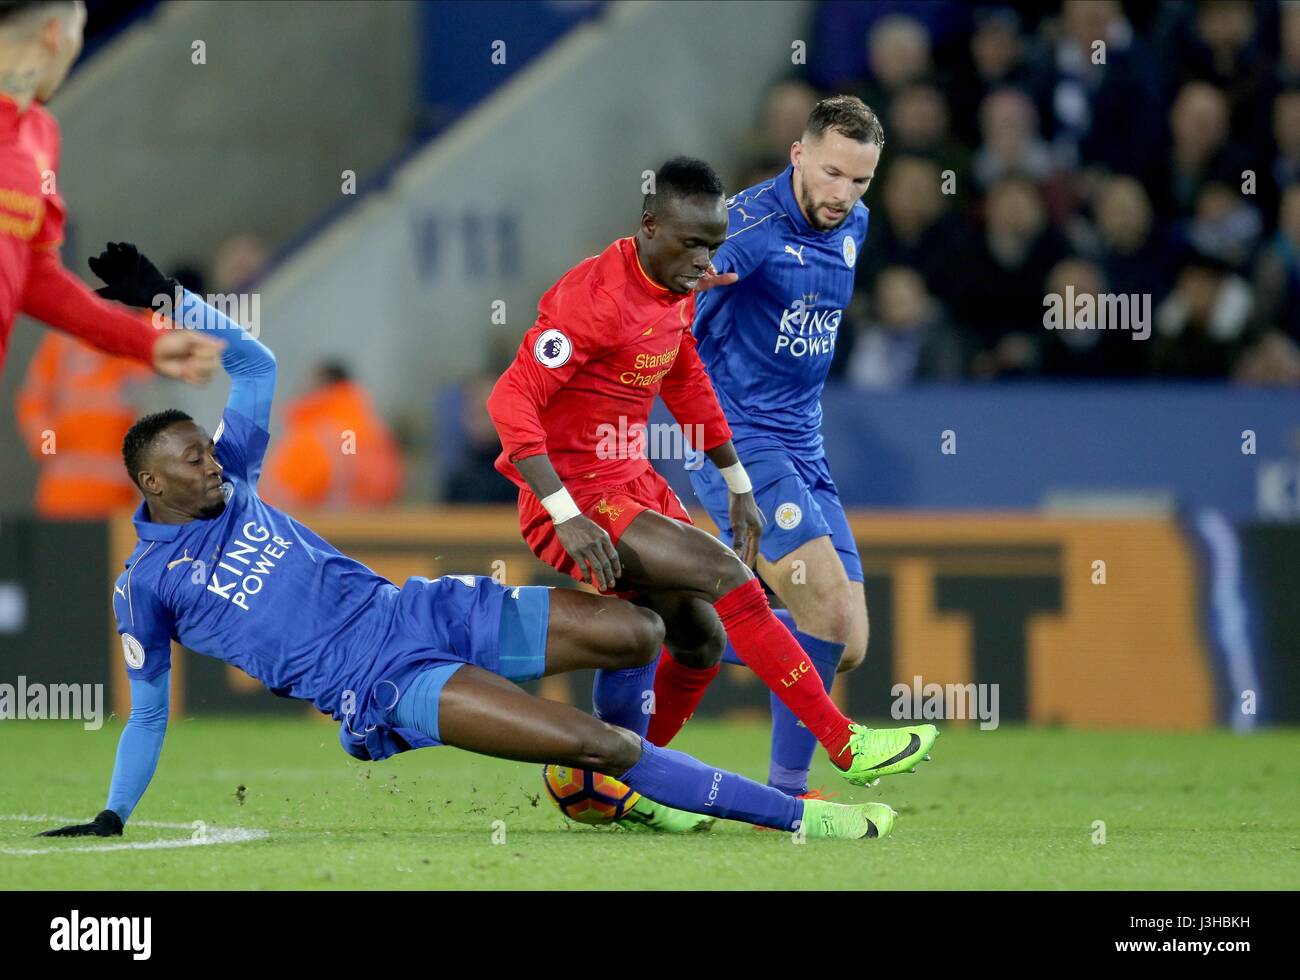 WILFRED NDIDI TACLKLES SADIO M LEICESTER CITY V LIVERPOOL KING POWER STADIUM LEICESTER ENGLAND 27 February 2017 Stock Photo